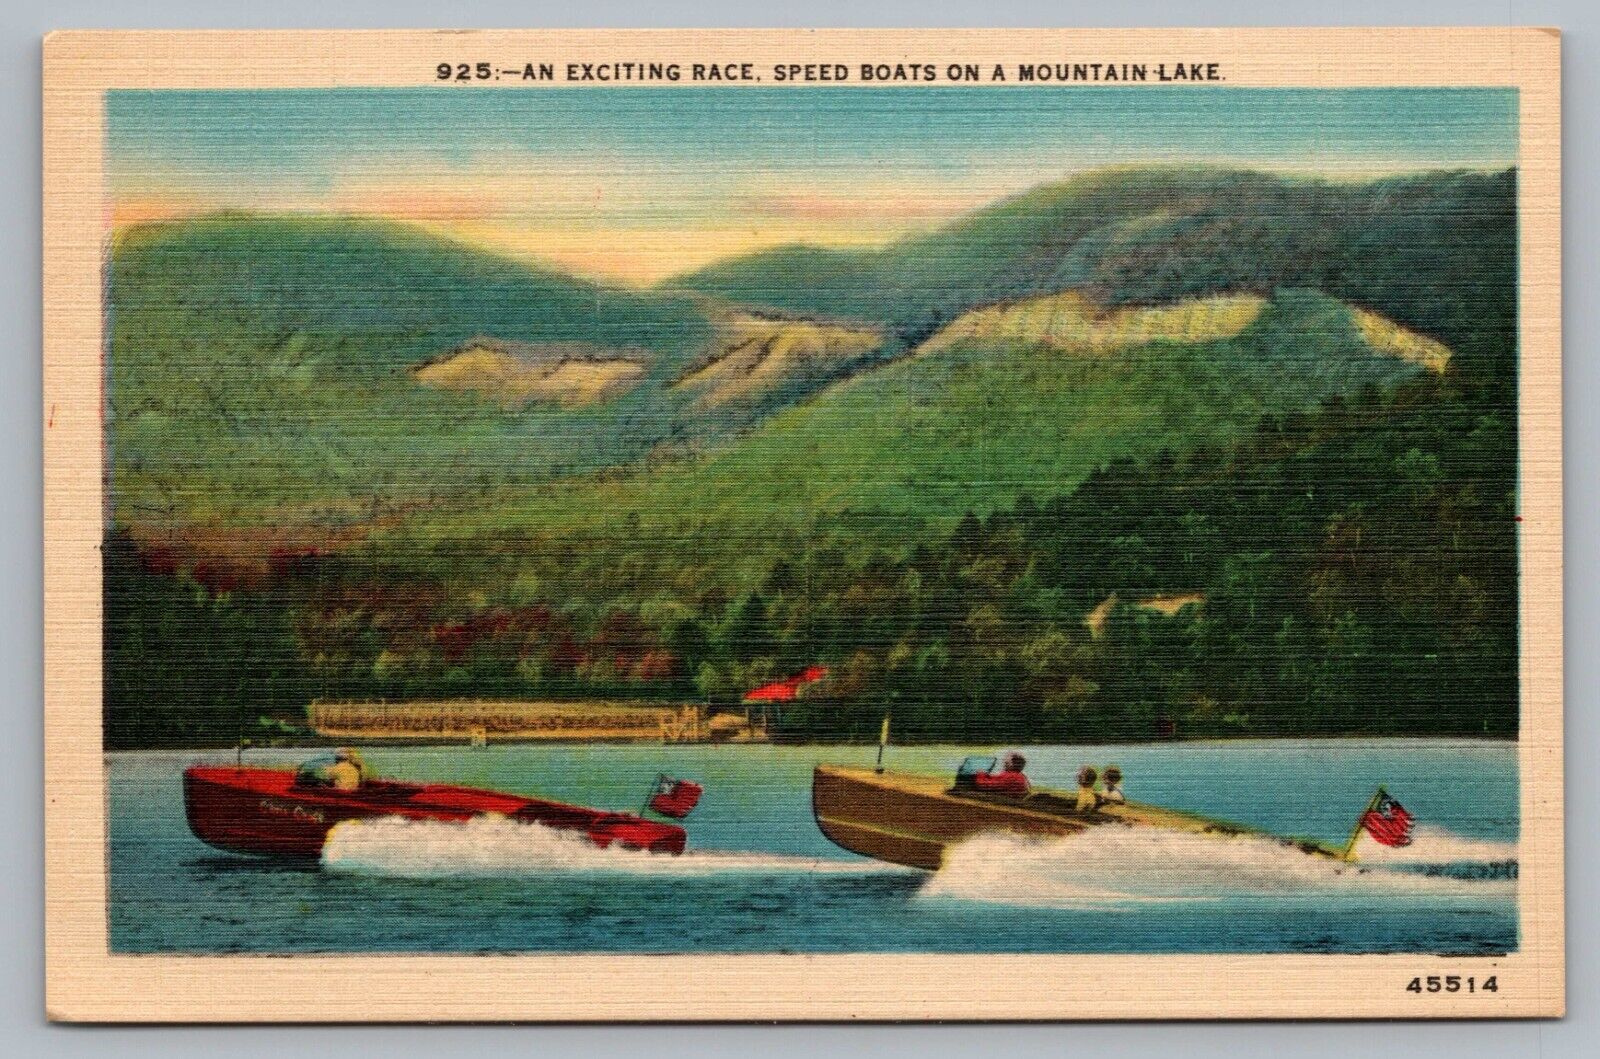 Speedboats Racing On A Mountain Lake  Speed Boats Flag Race Postcard Vintage D4